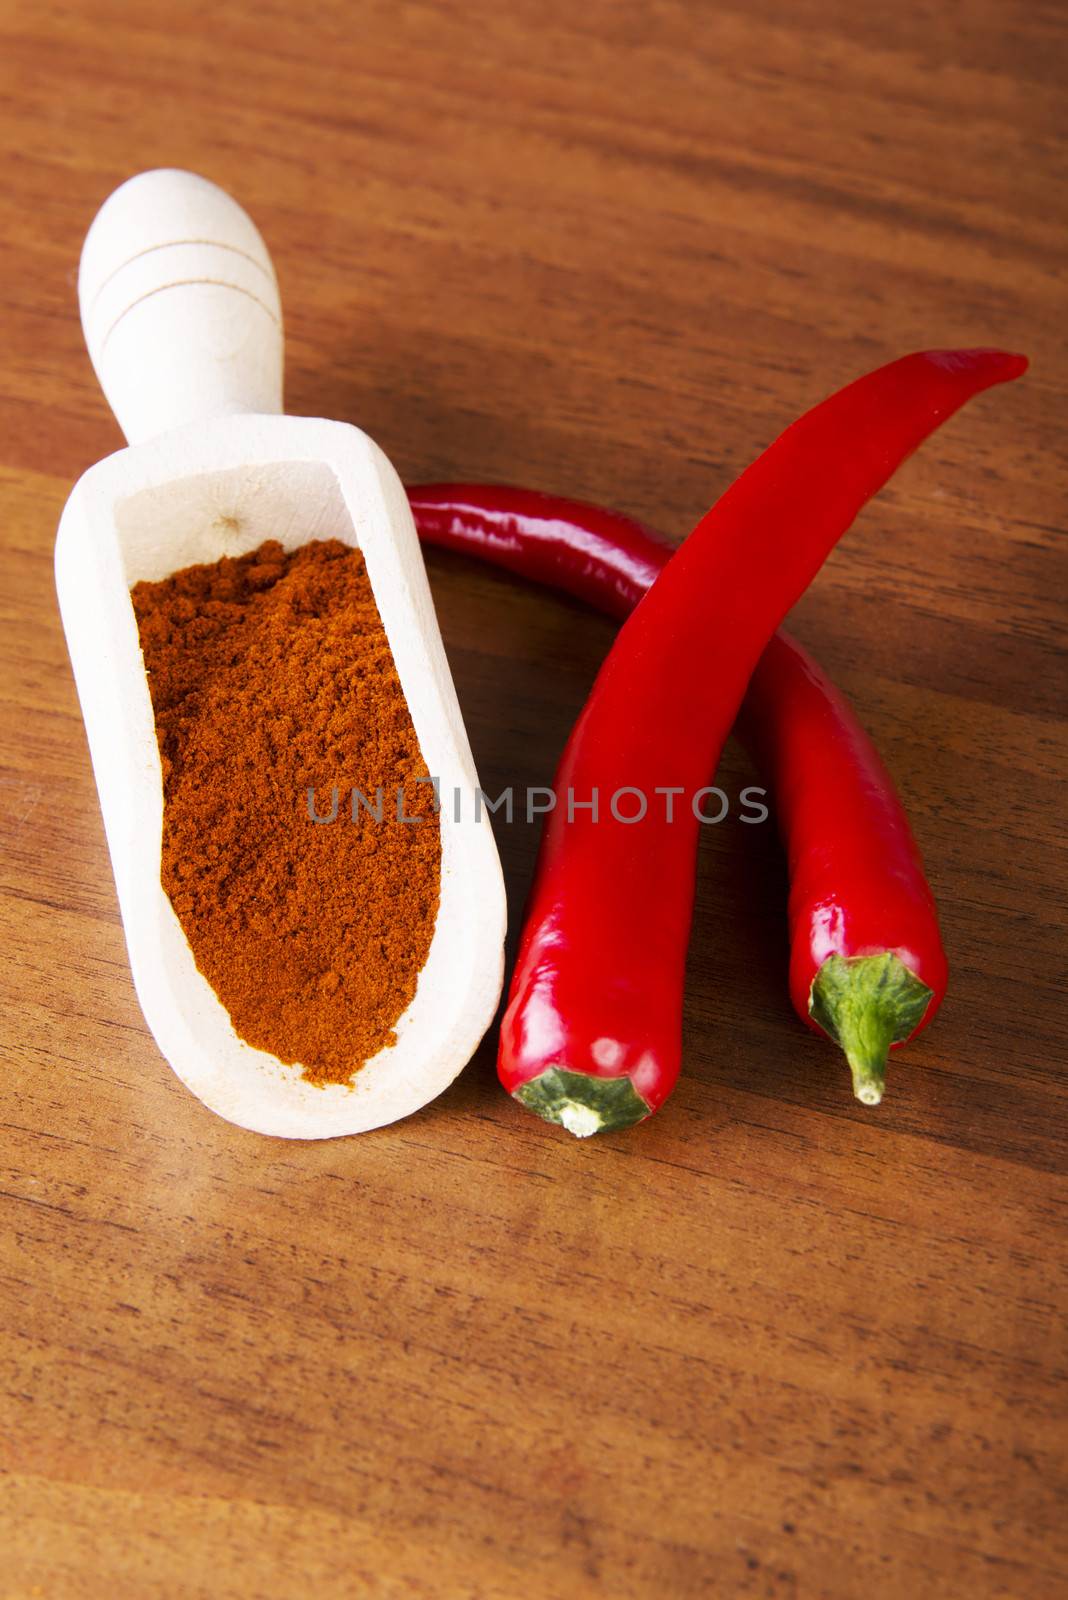 Two chili peppers with paprika spice. by BDS